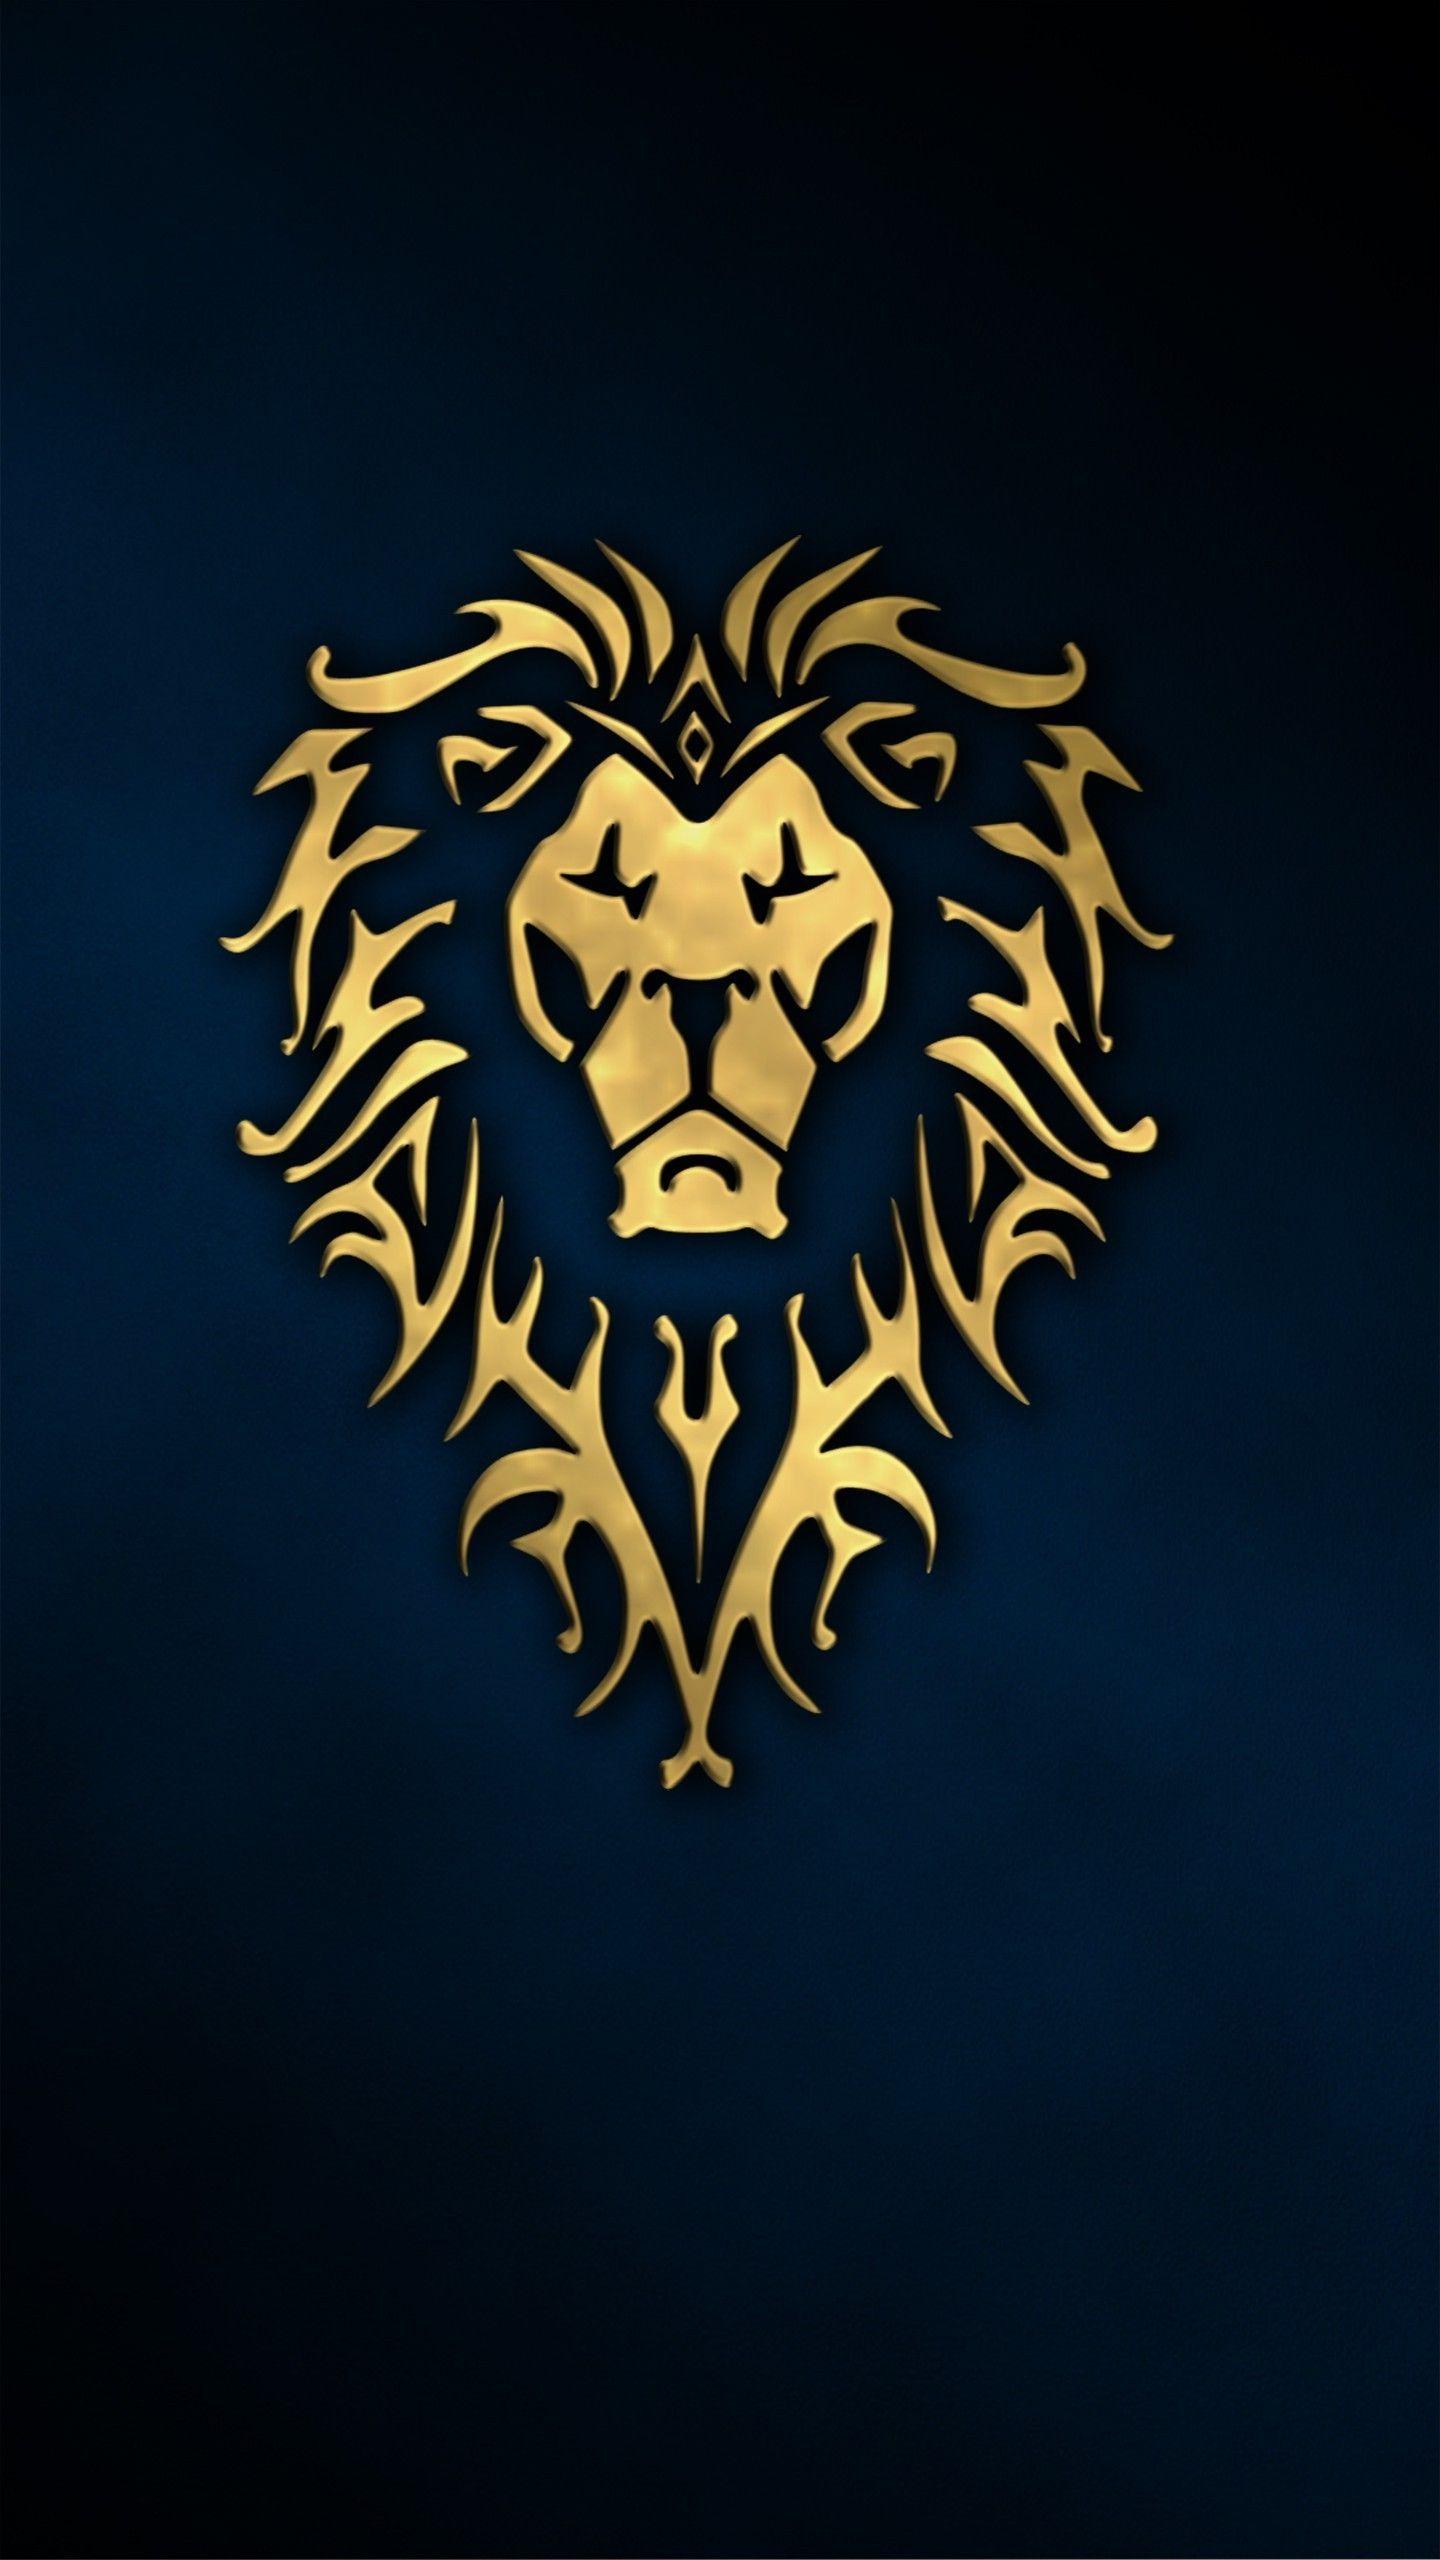 World Of Warcraft Phone Wallpaper Free Download. lions